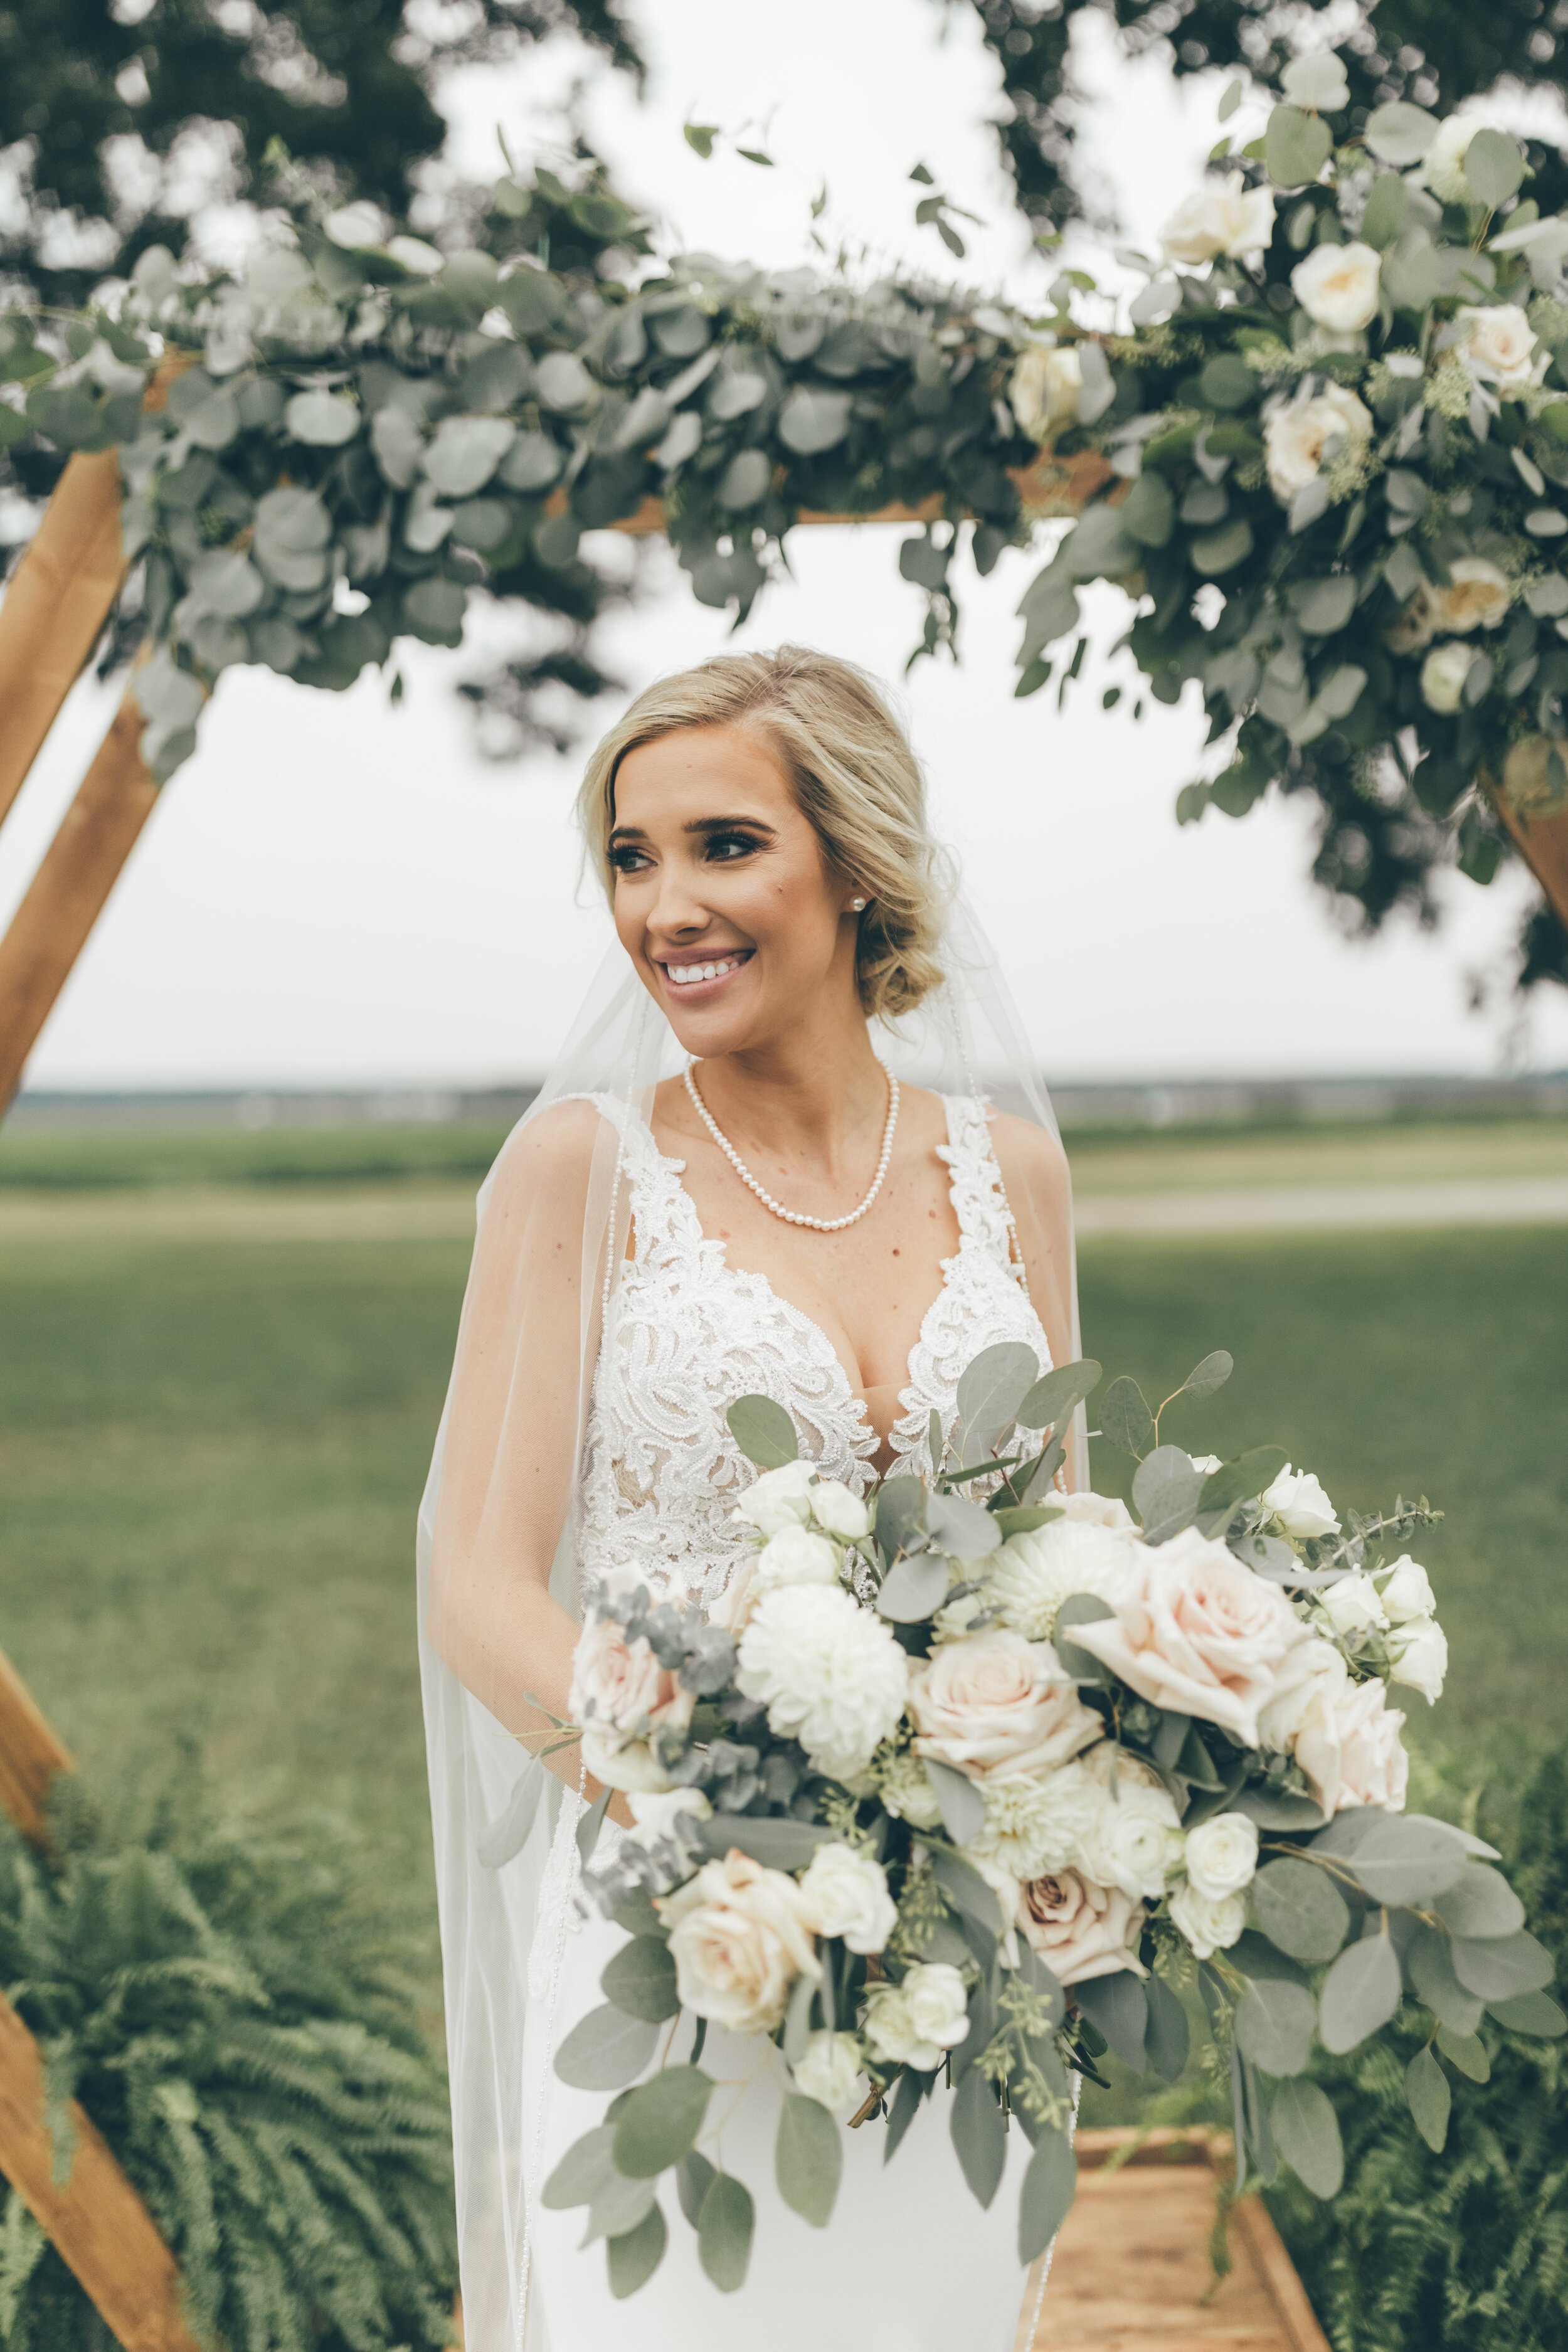 ivory-and-beau-bride-and-florals-real-bride-real-wedding-blog-wedding-dress-bridal-gown-wedding-gown-wedding-flowers-savannah-florist-wedding-florist-maggie-sottero-wedding-dress-organic-natural-wedding-Griffin_0738.jpg